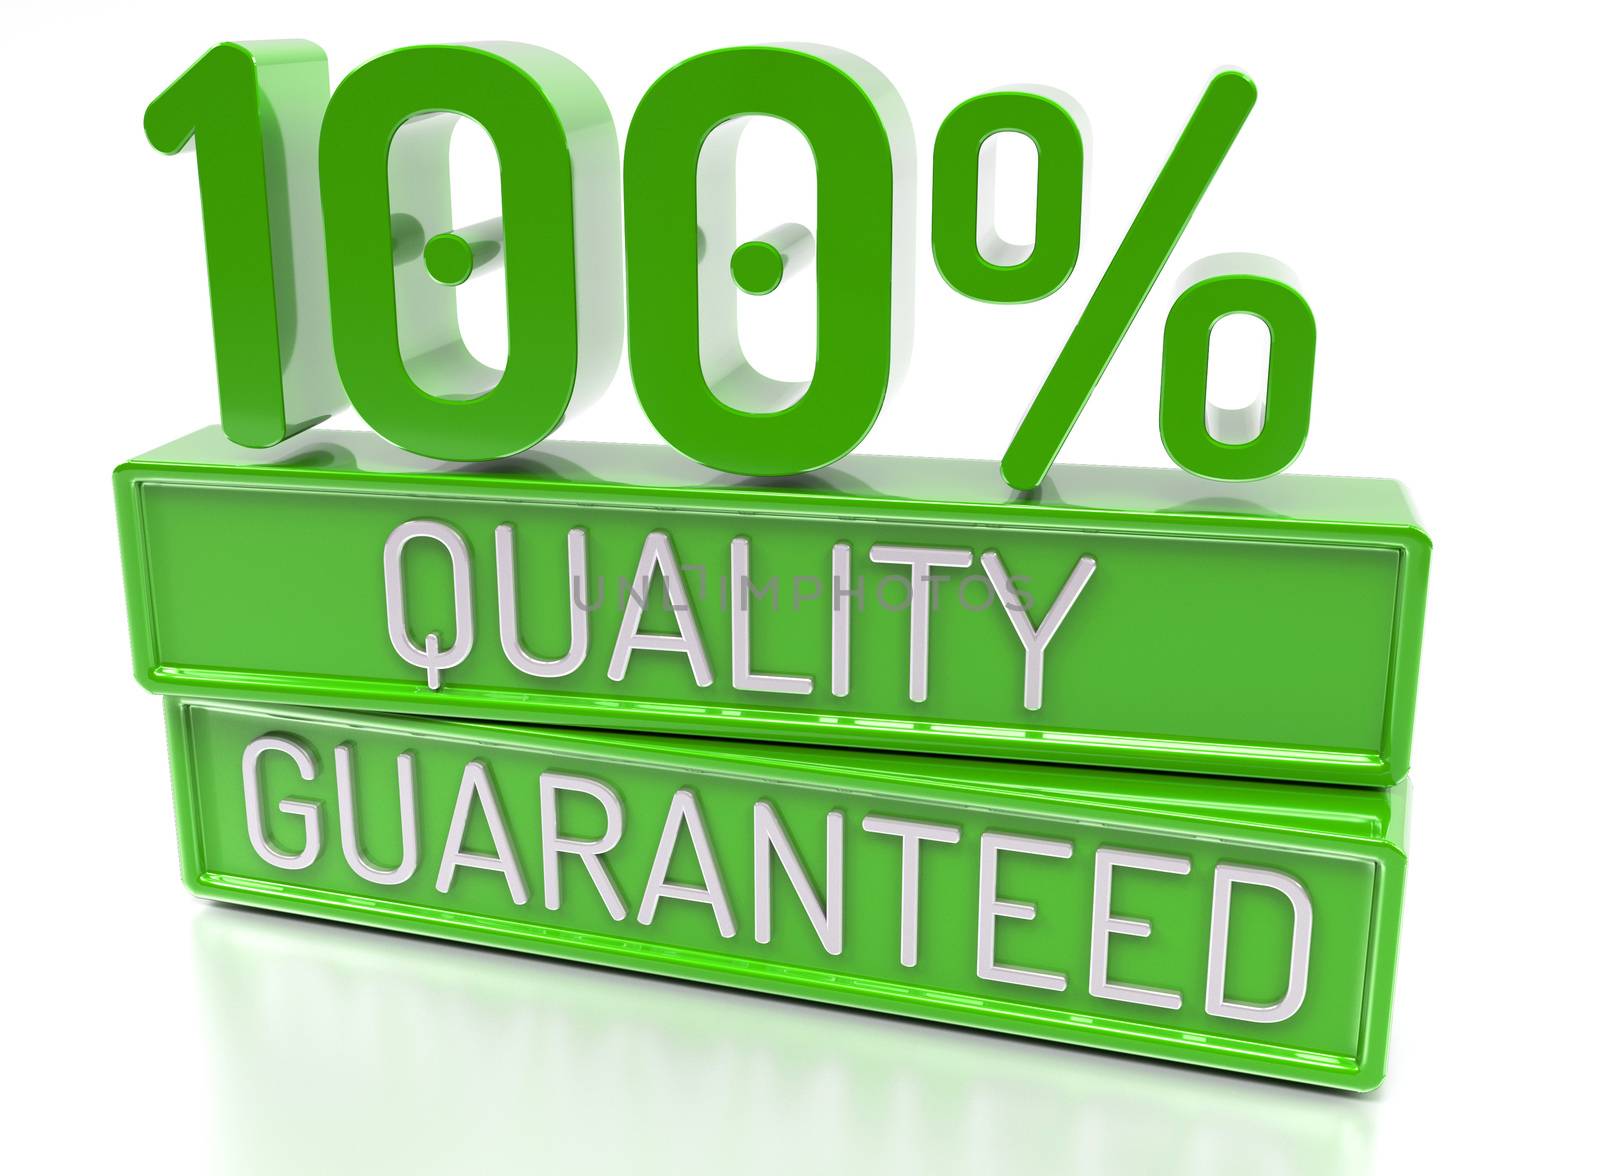 100% Quality Guaranteed, 100 percent, 3d banner - isolated, on w by akaprinay